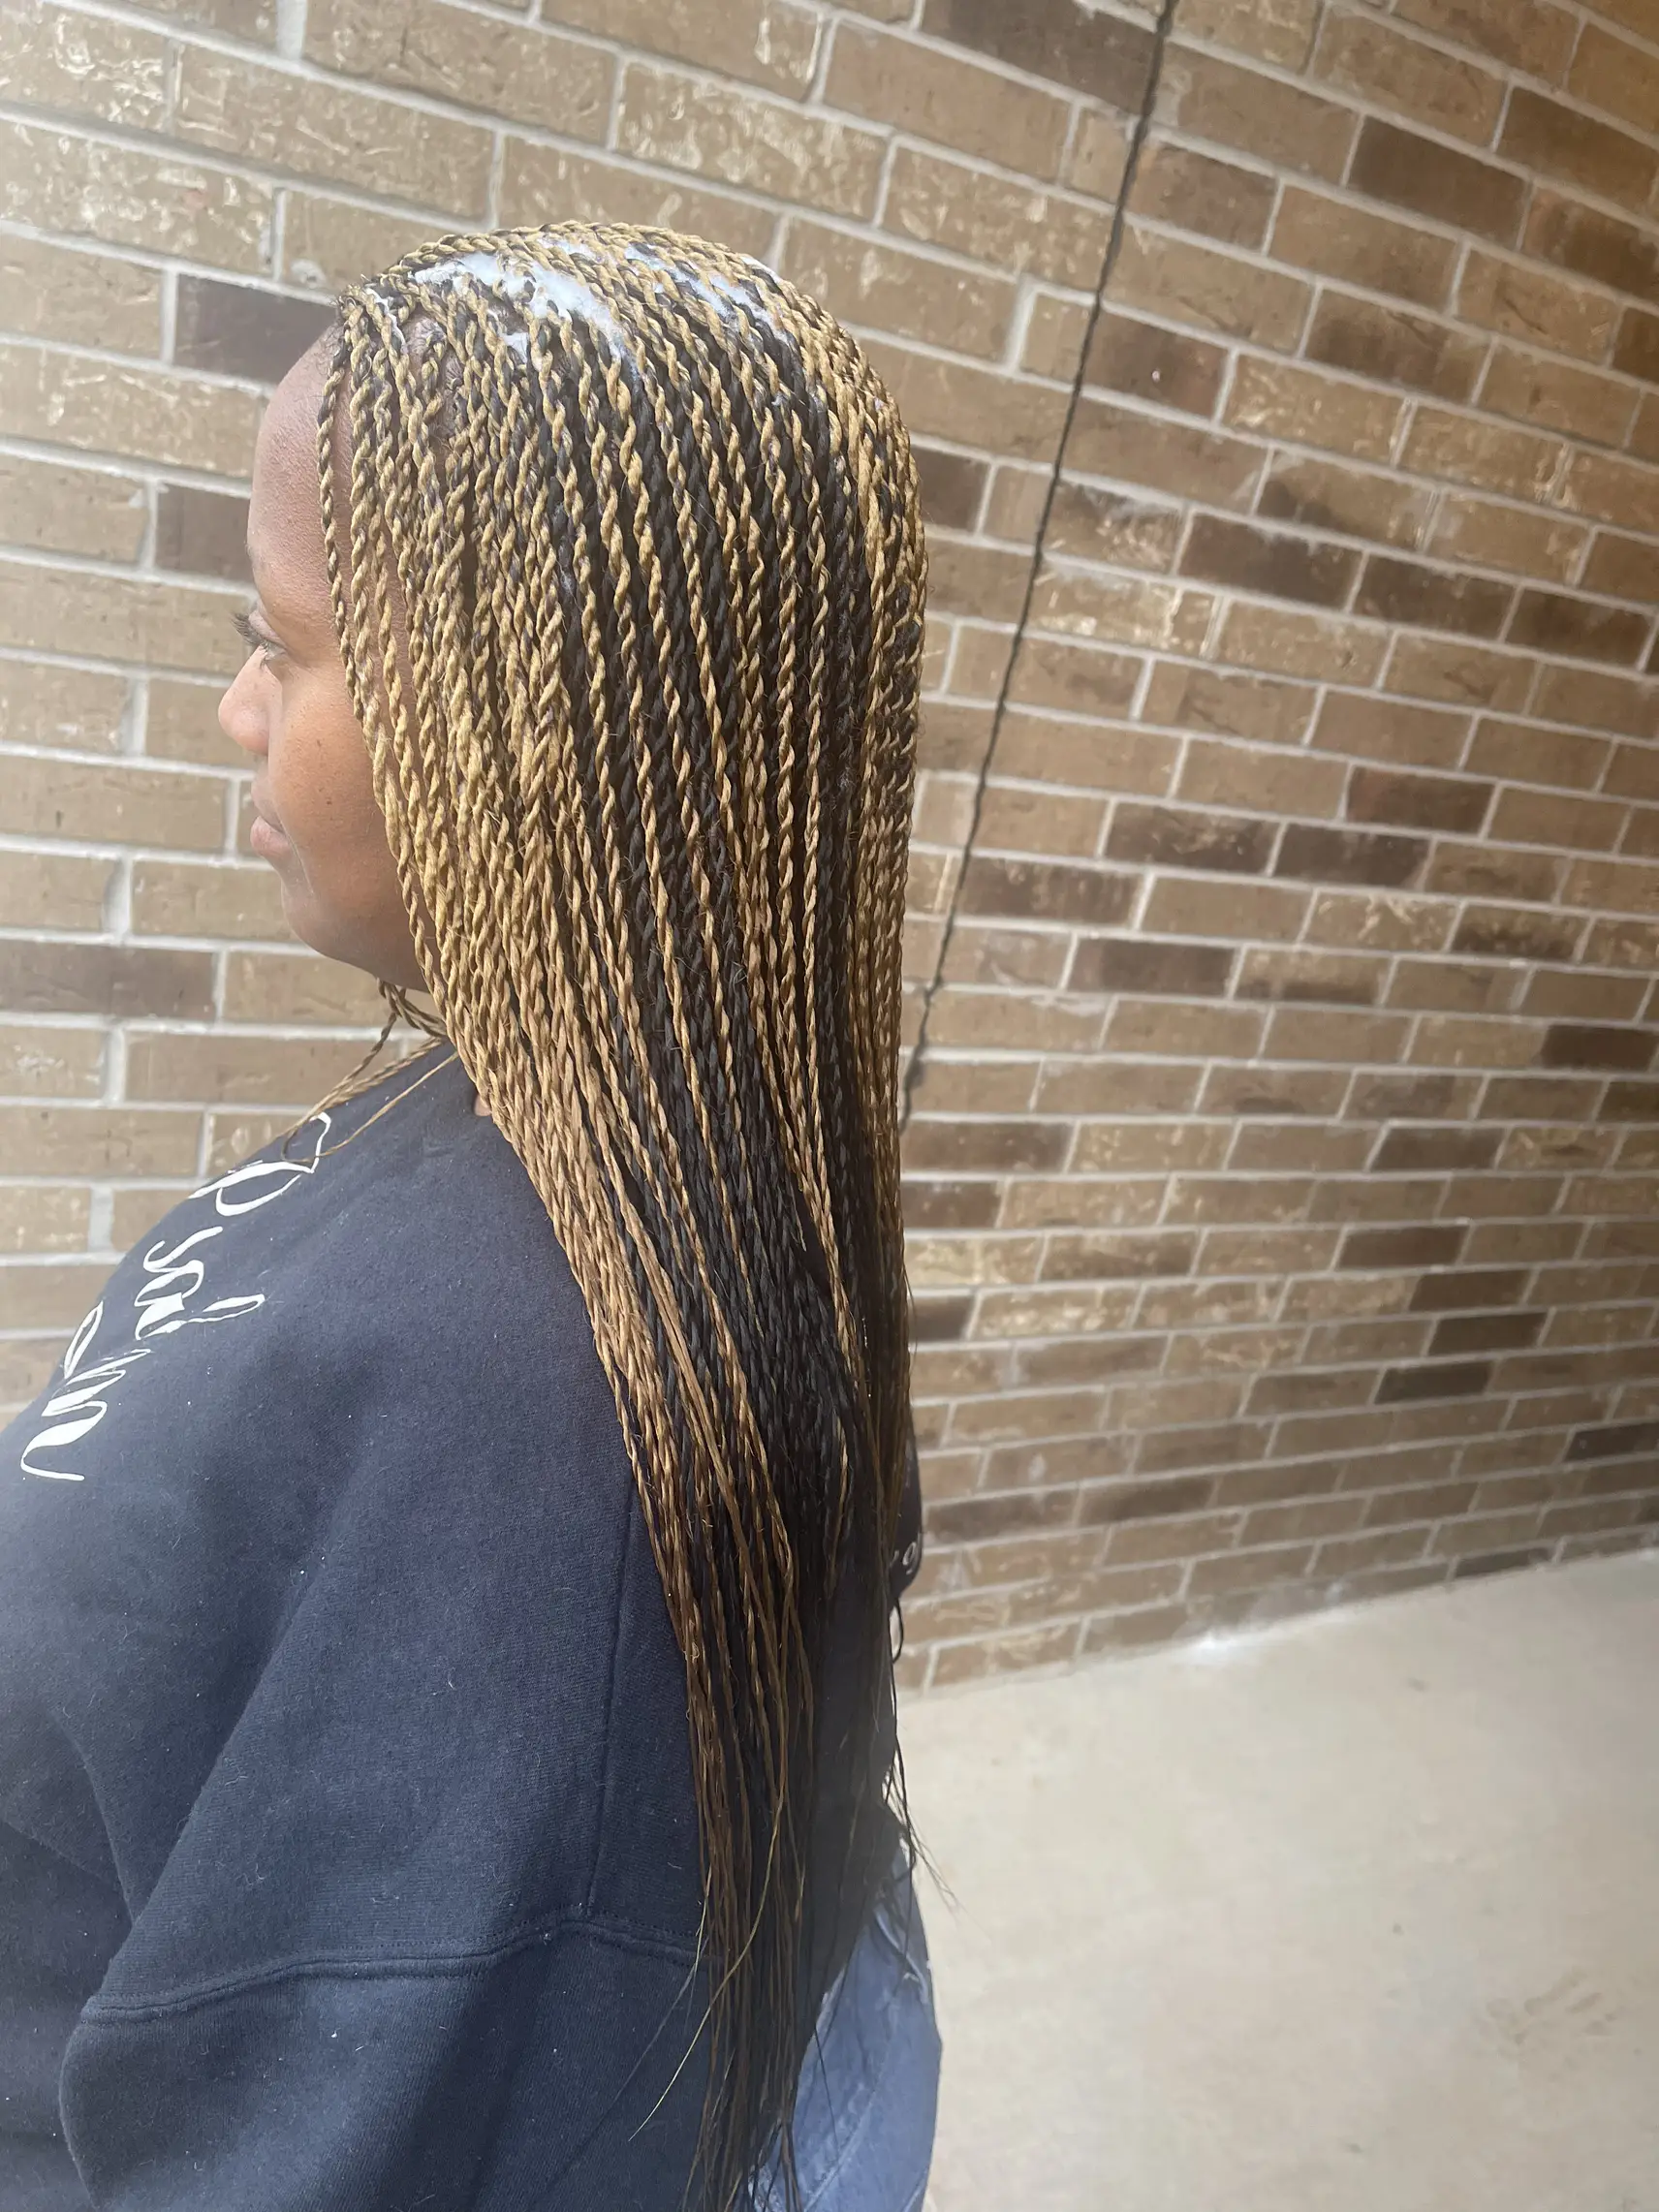 27 Chic Senegalese Twist Hairstyles to Copy  Twist hairstyles, Senegalese twist  braids, Senegalese twist hairstyles